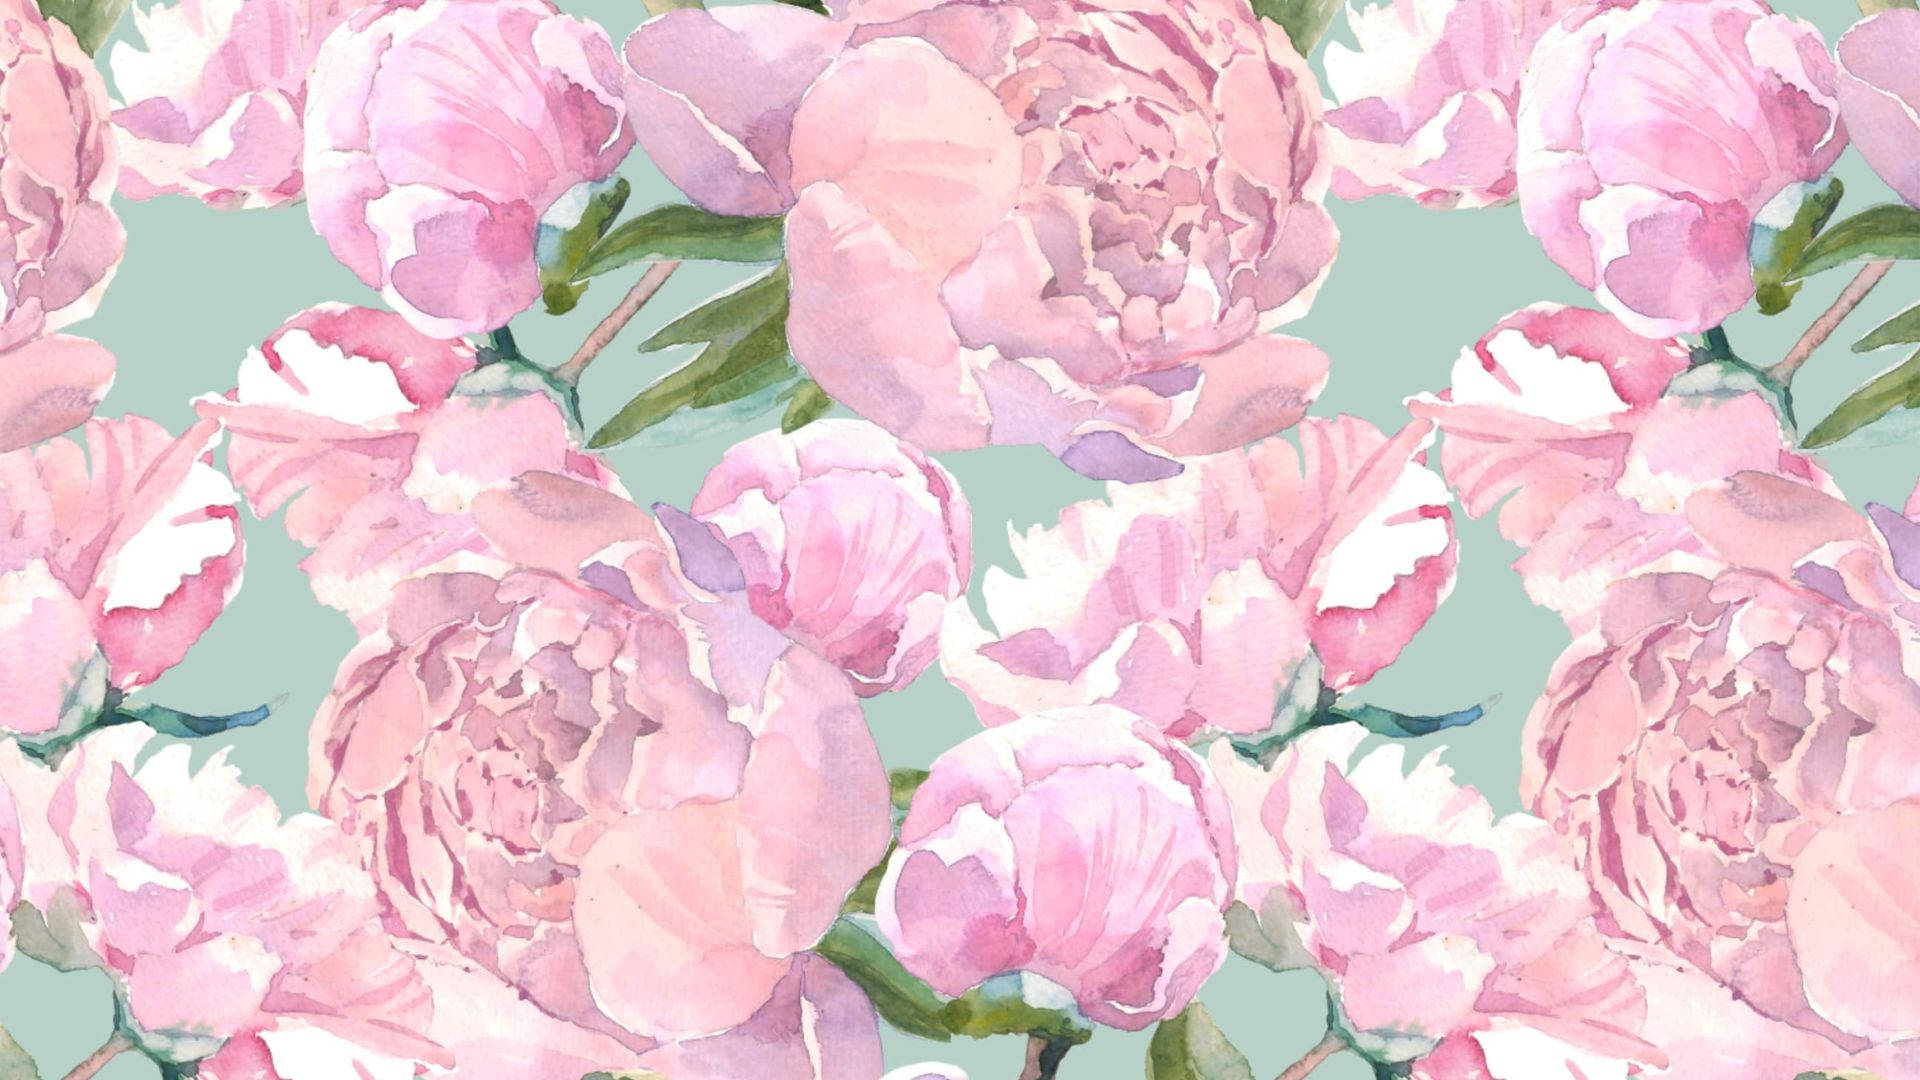 Aesthetic Pink Flowers With Leaves Wallpaper